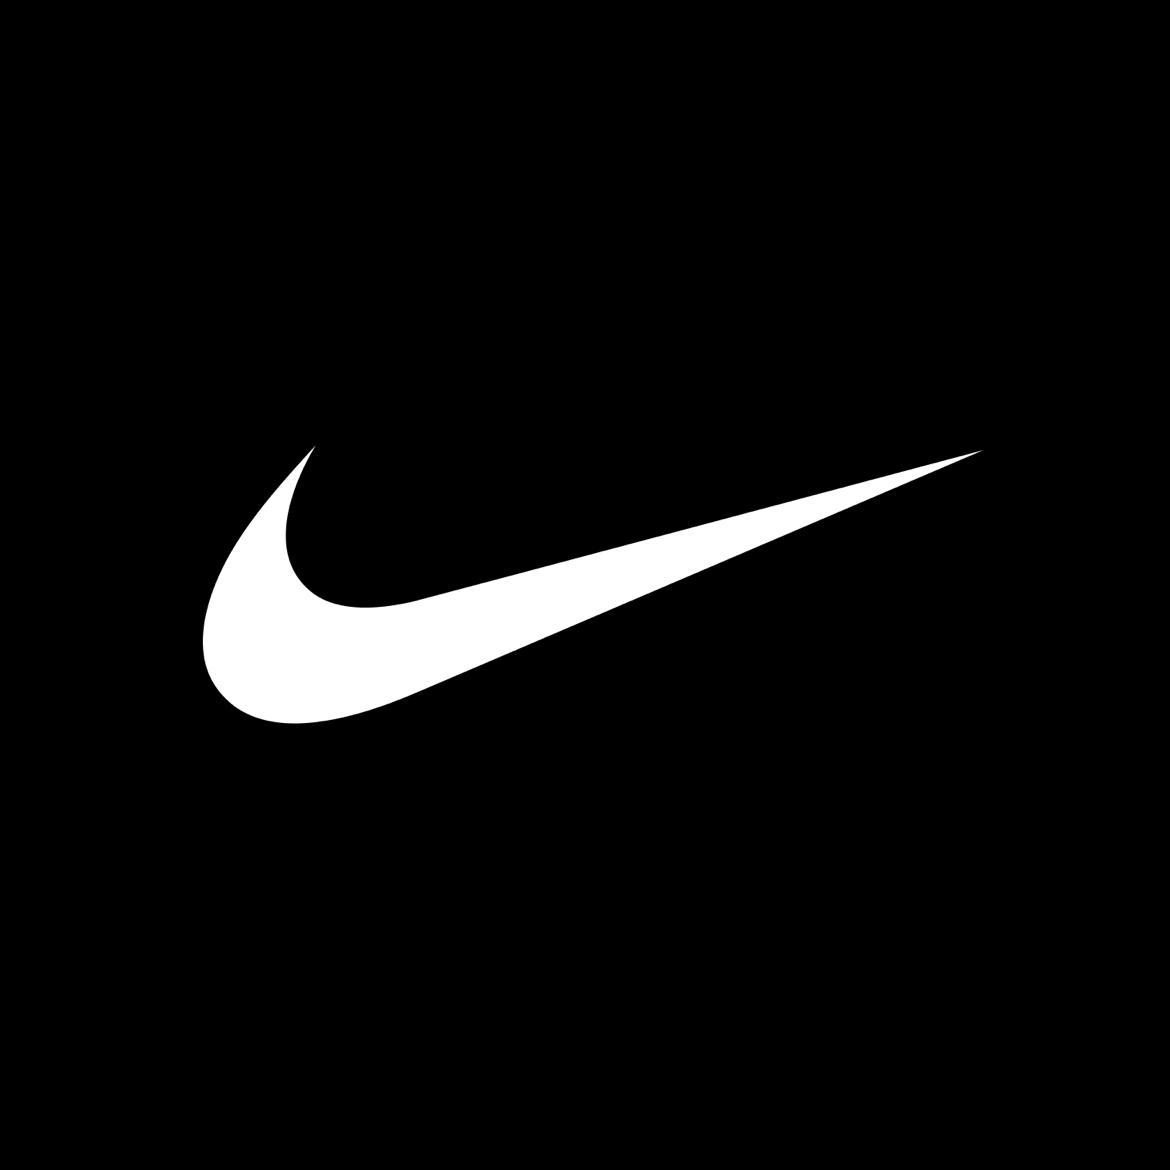 Nike's images